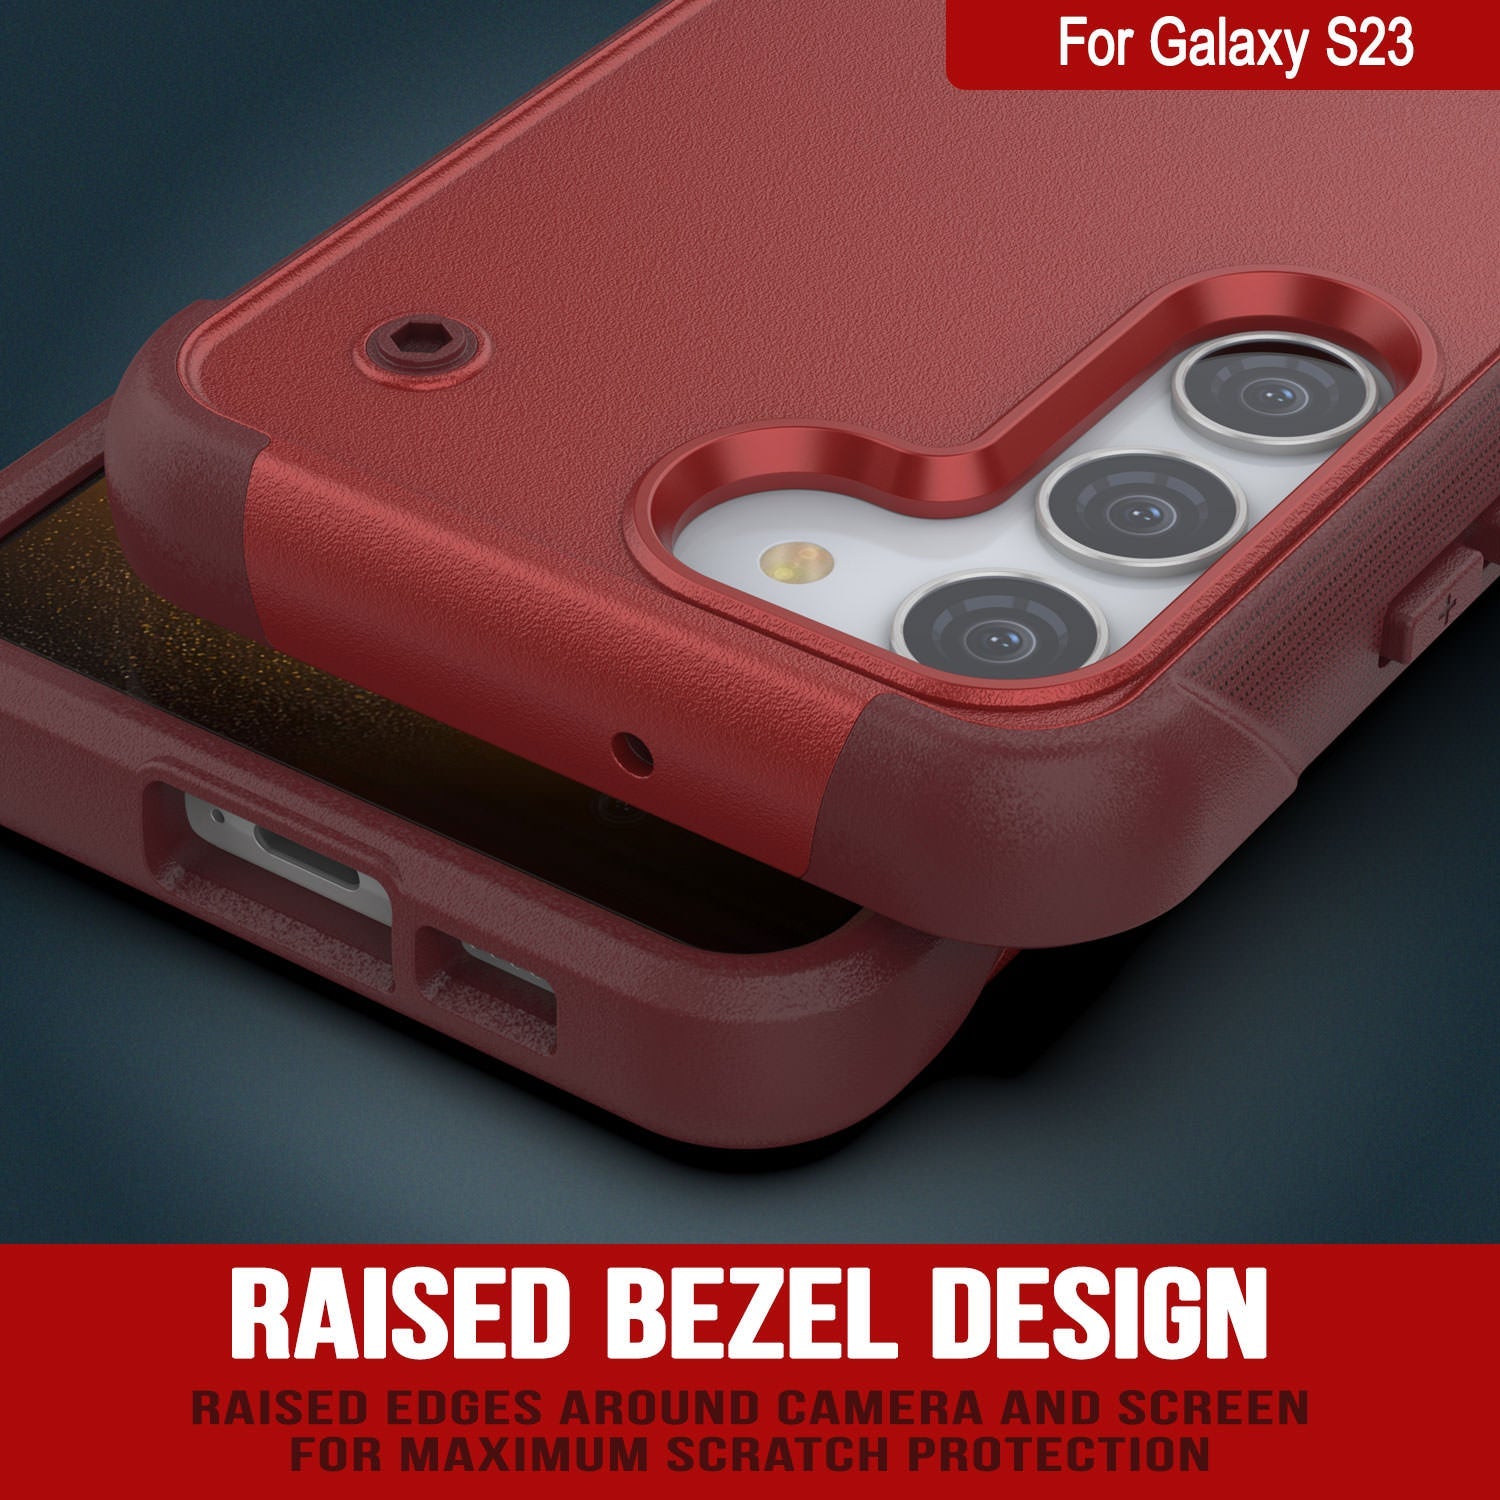 Punkcase Galaxy S23 Case [Reliance Series] Protective Hybrid Military Grade Cover W/Built-in Kickstand [Red-Rose]